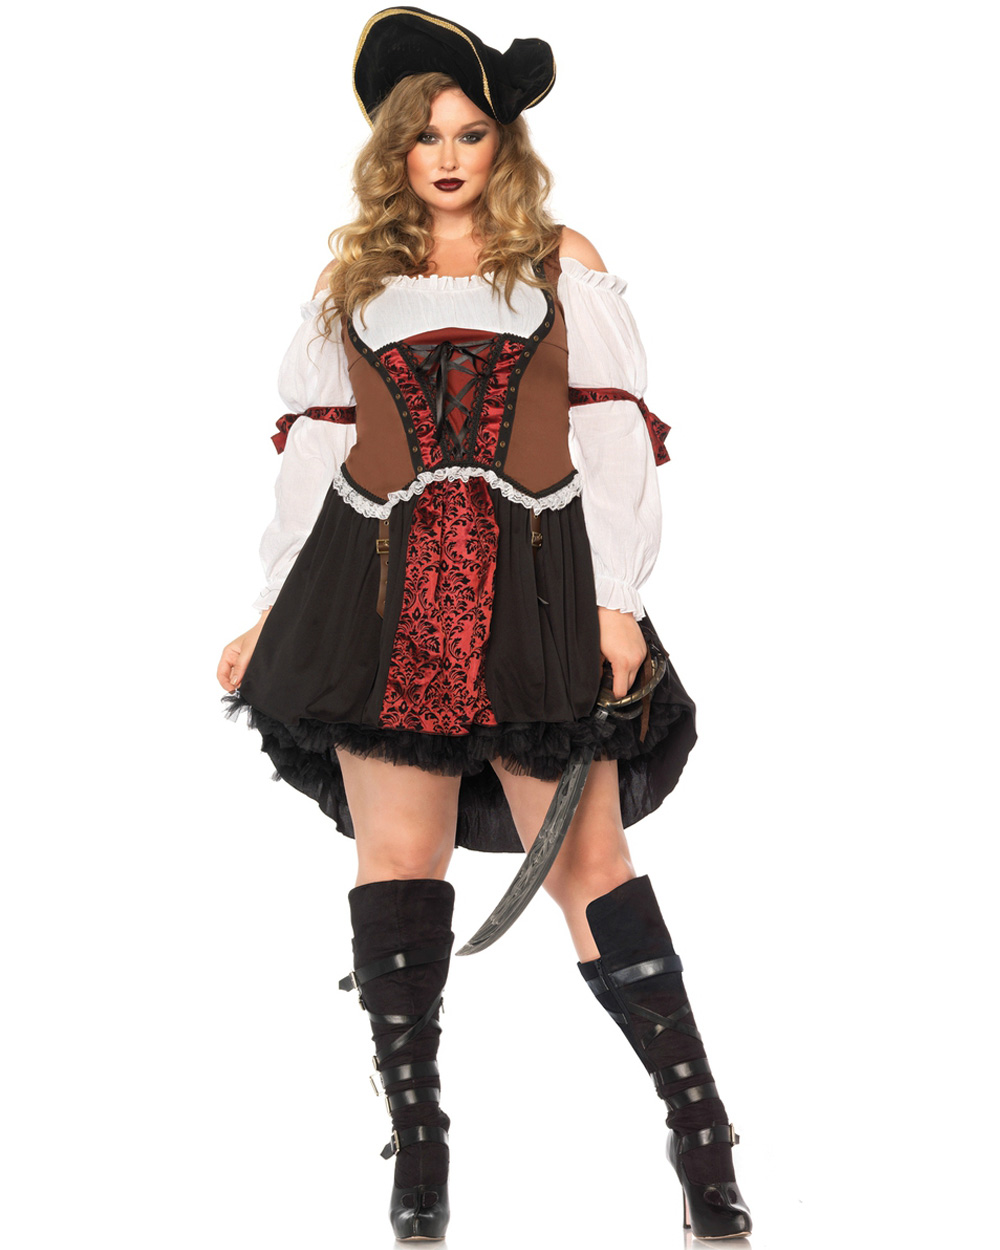 CL696 Ruthless Pirate Wench Plus Buccaneer High Seas Fancy Dress Womens Costume | eBay